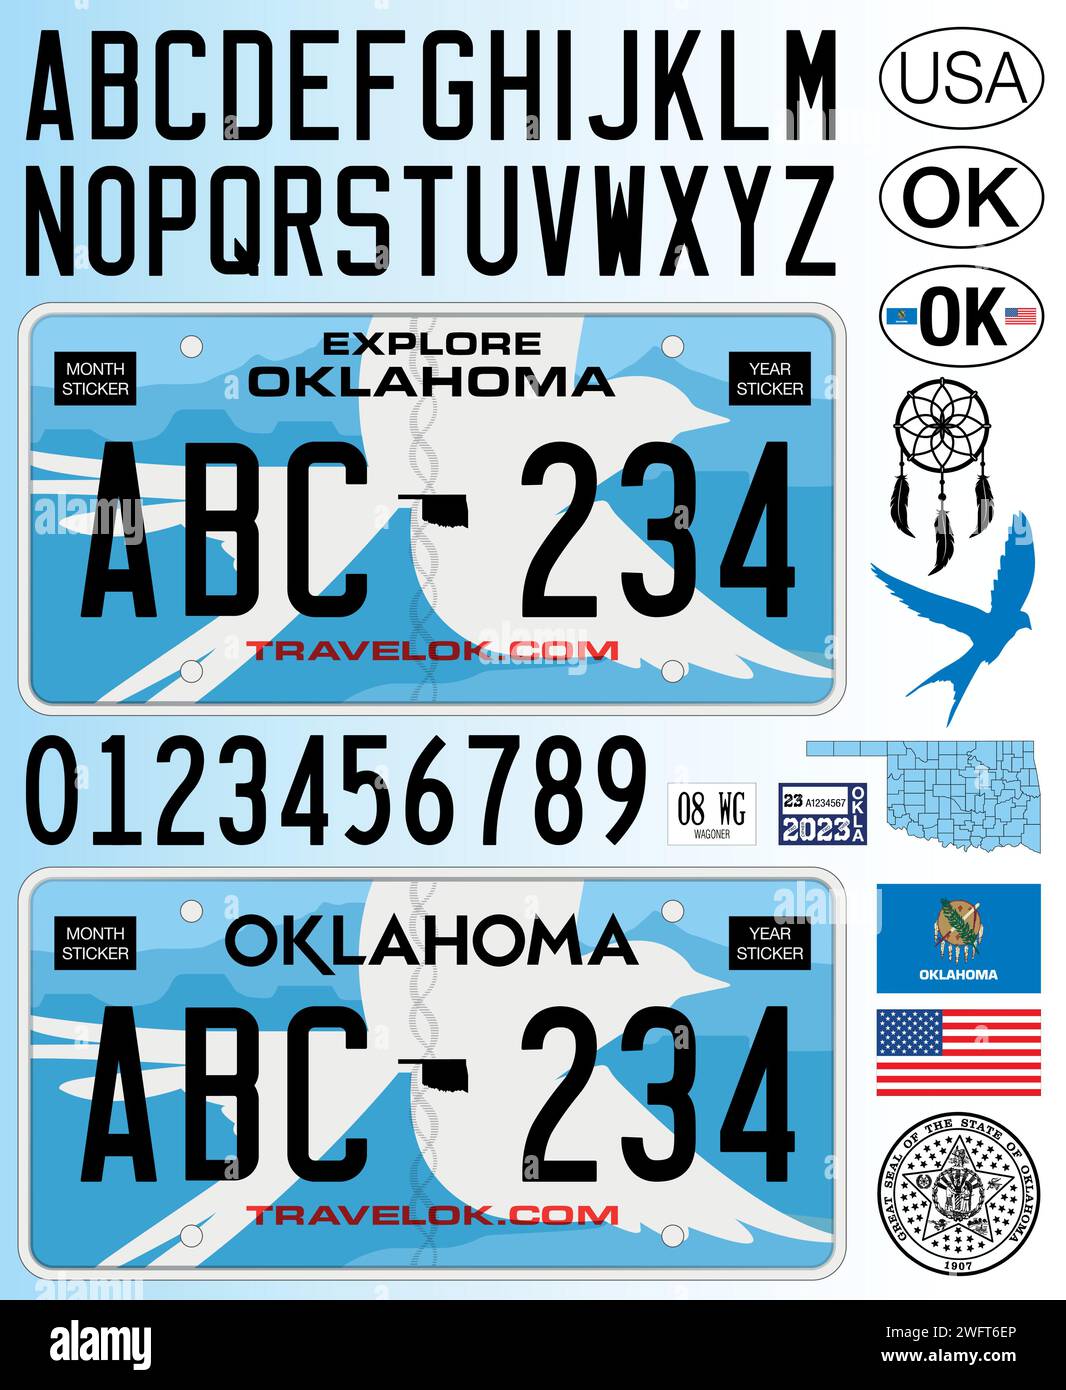 Oklahoma car license plate blue style, letters, numbers and symbols, vector illustration, USA Stock Vector